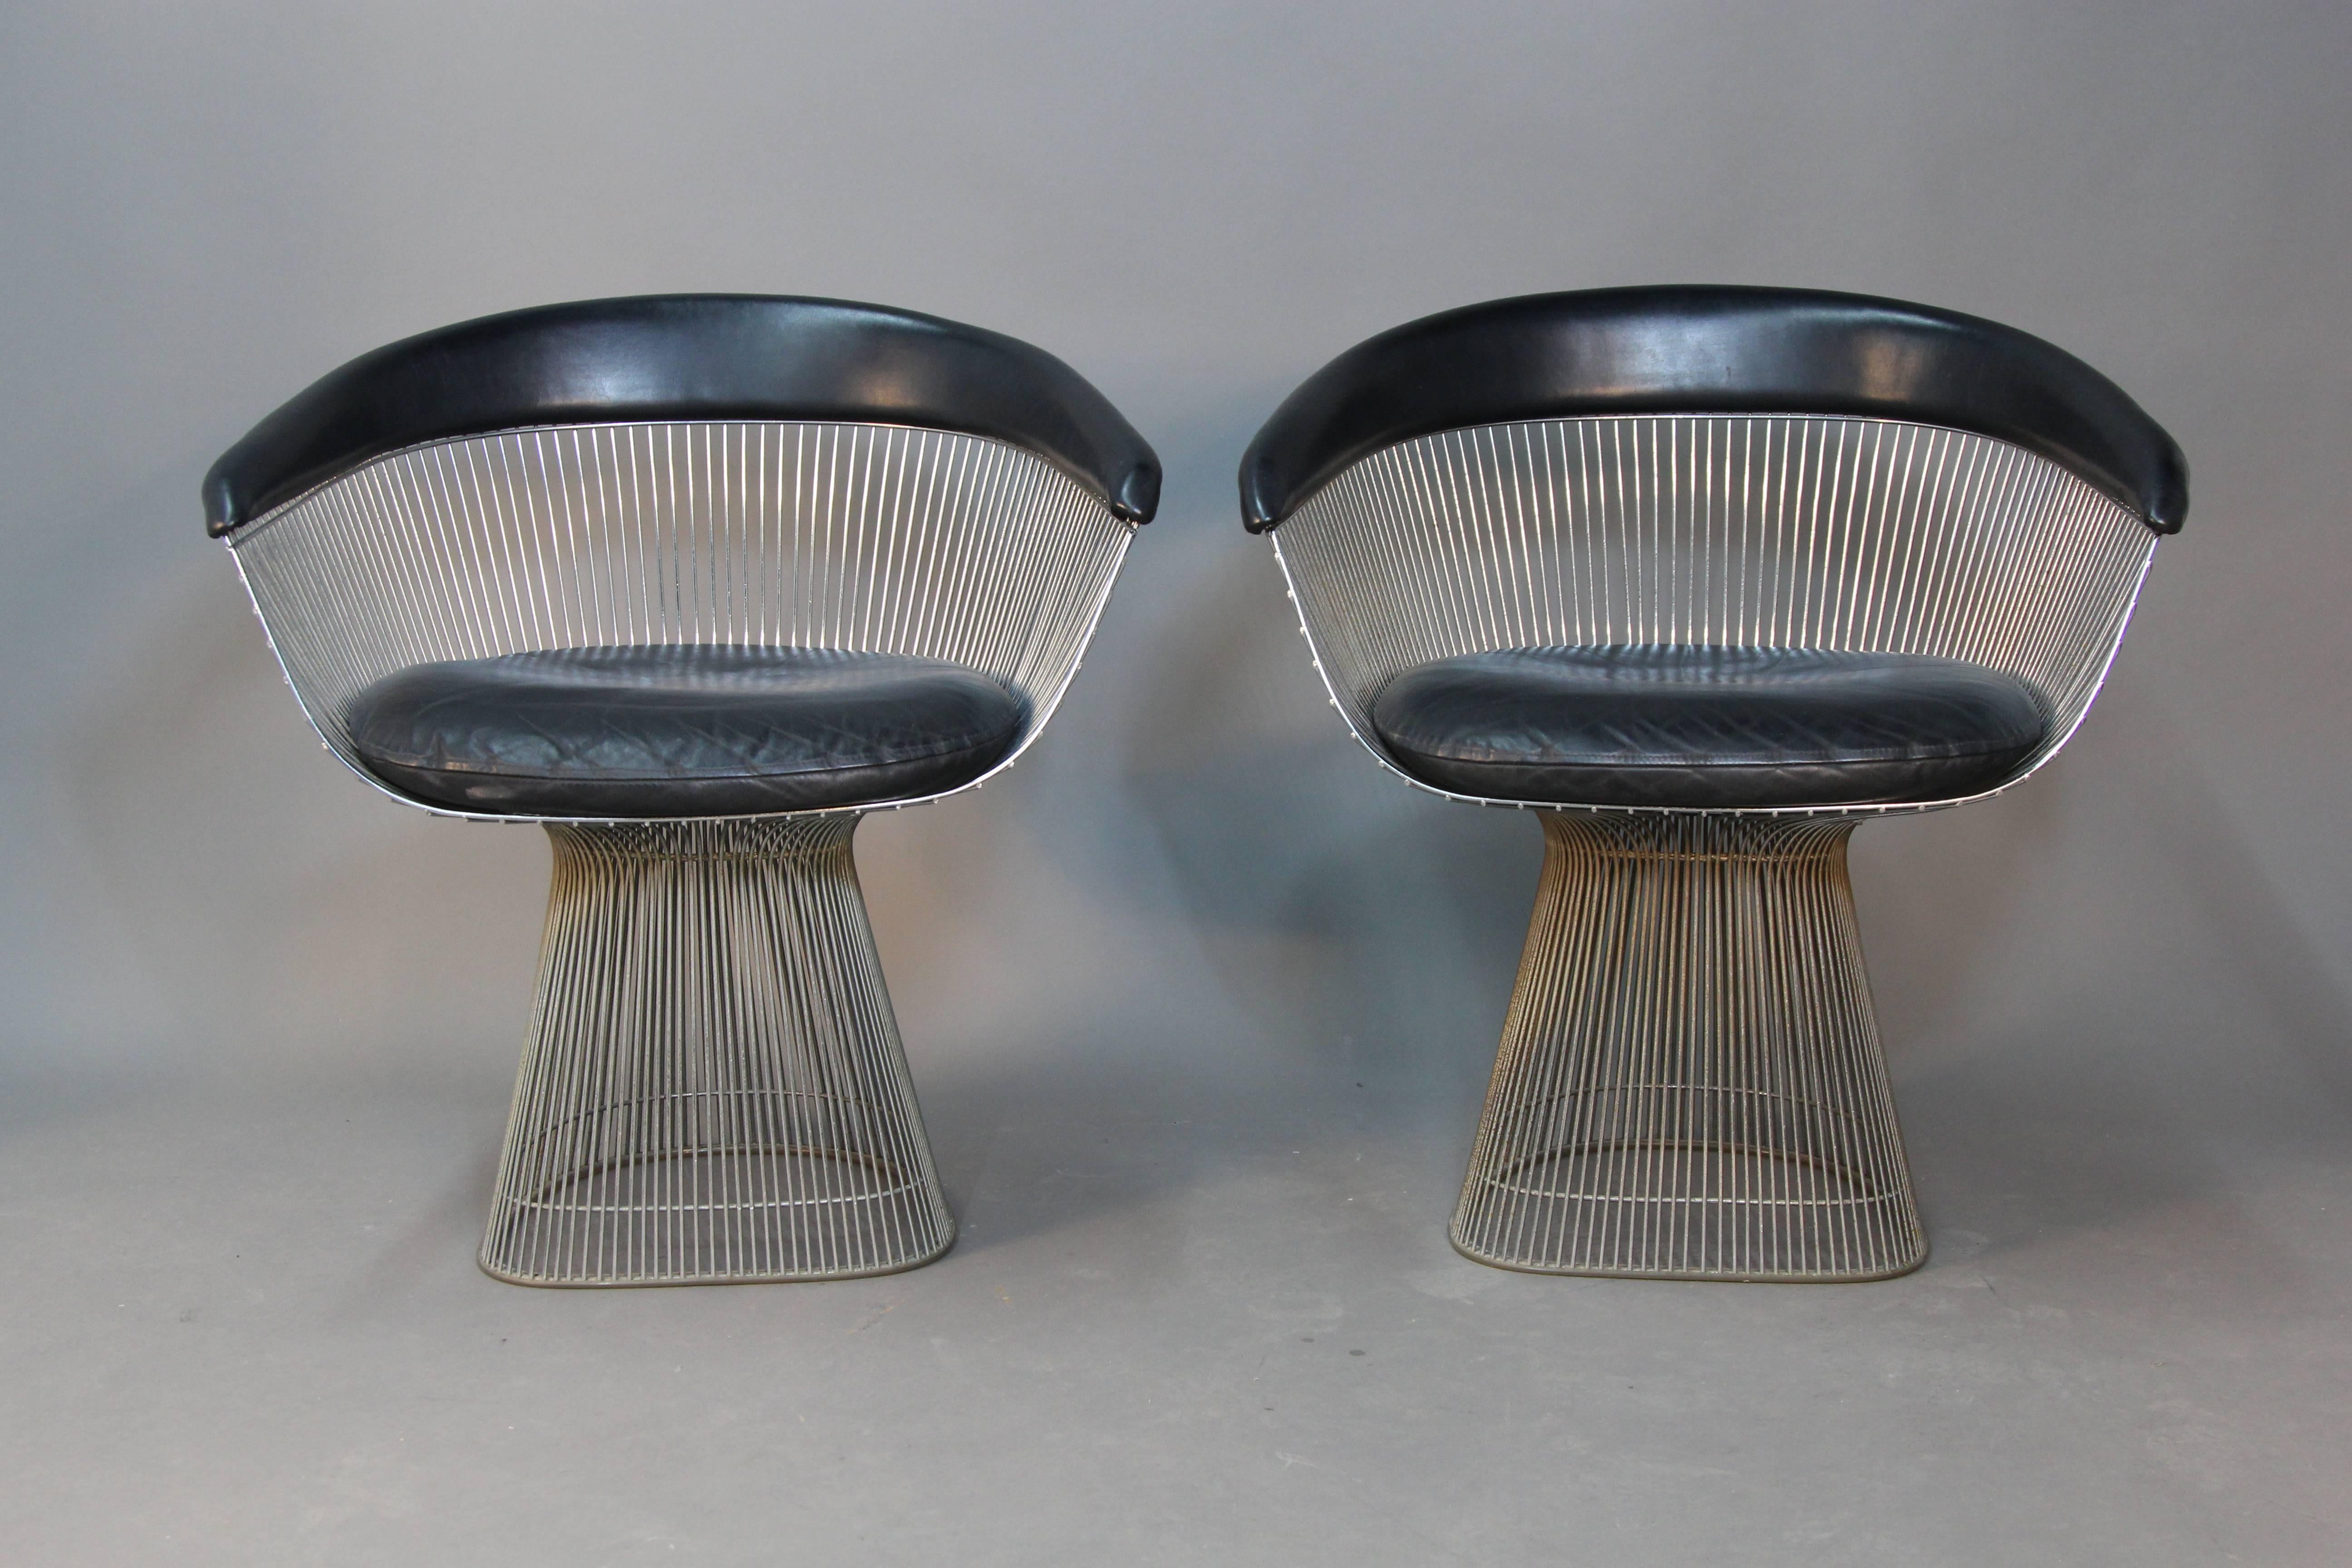 Original warren planter steel side chairs with leather upholstery.

Platner produced a furniture collection that has proved to be a continuing icon of 1960s modernism. He is also famed with designing several prominent interiors in New York City,